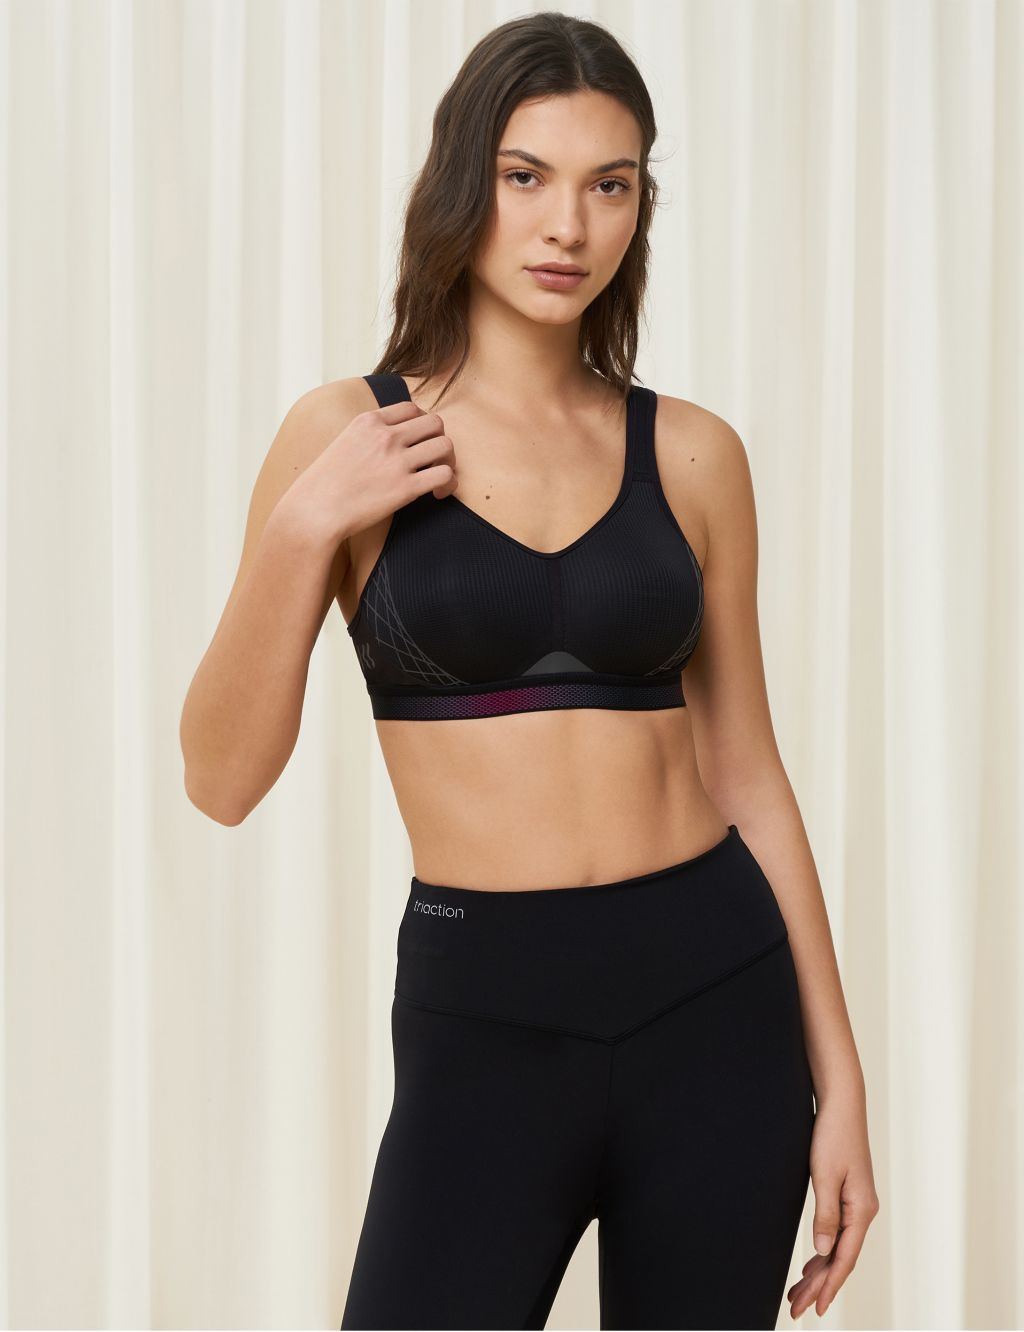 Triaction Cardio Cloud Non Wired Sports Bra image 1